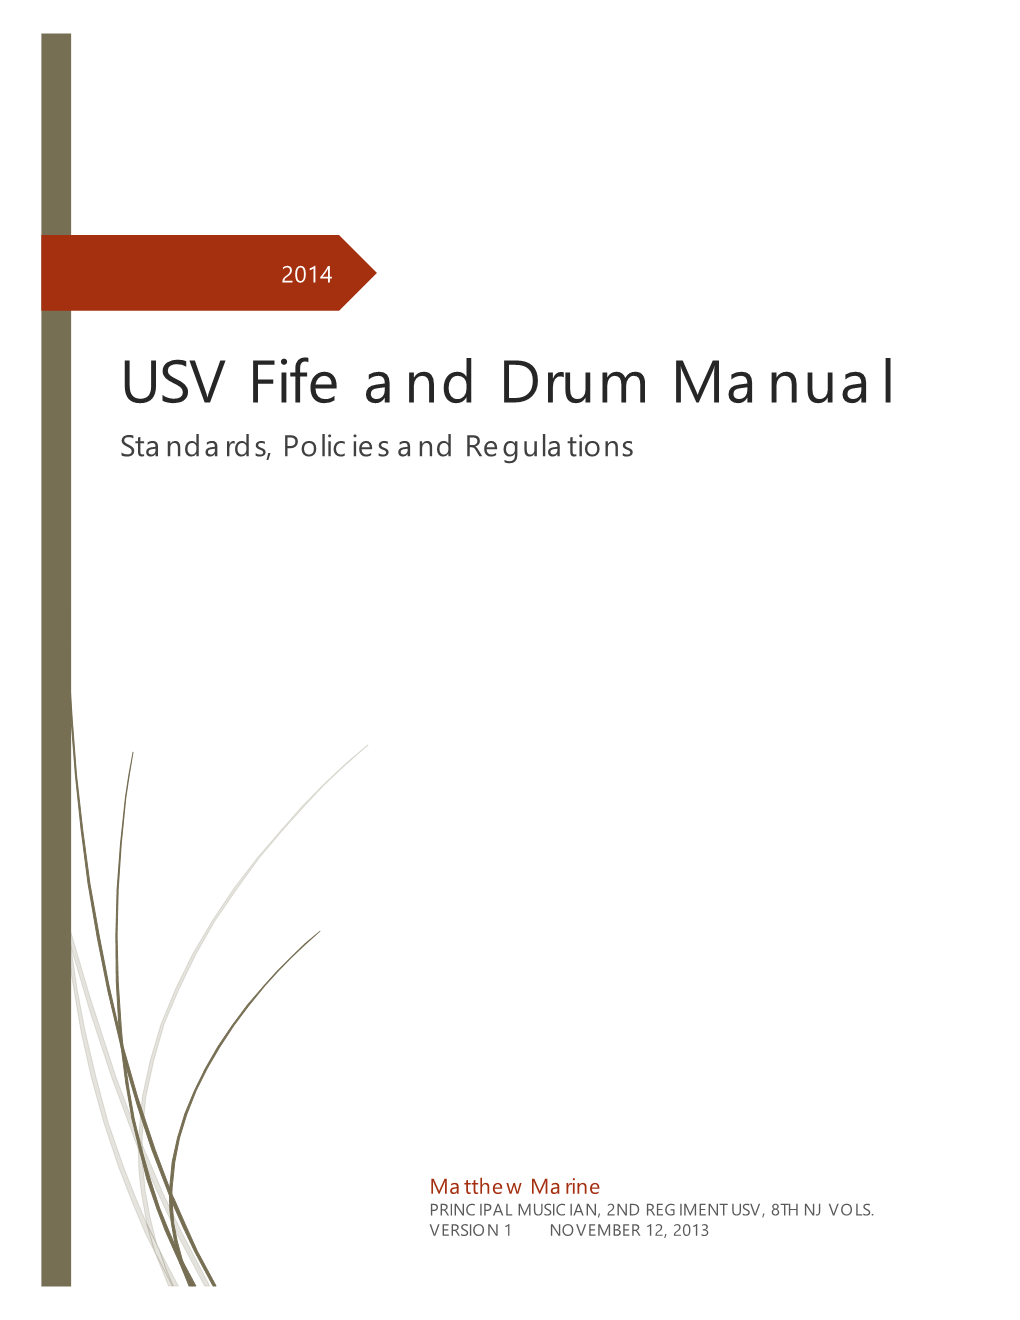 USV Fife and Drum Manual Standards, Policies and Regulations